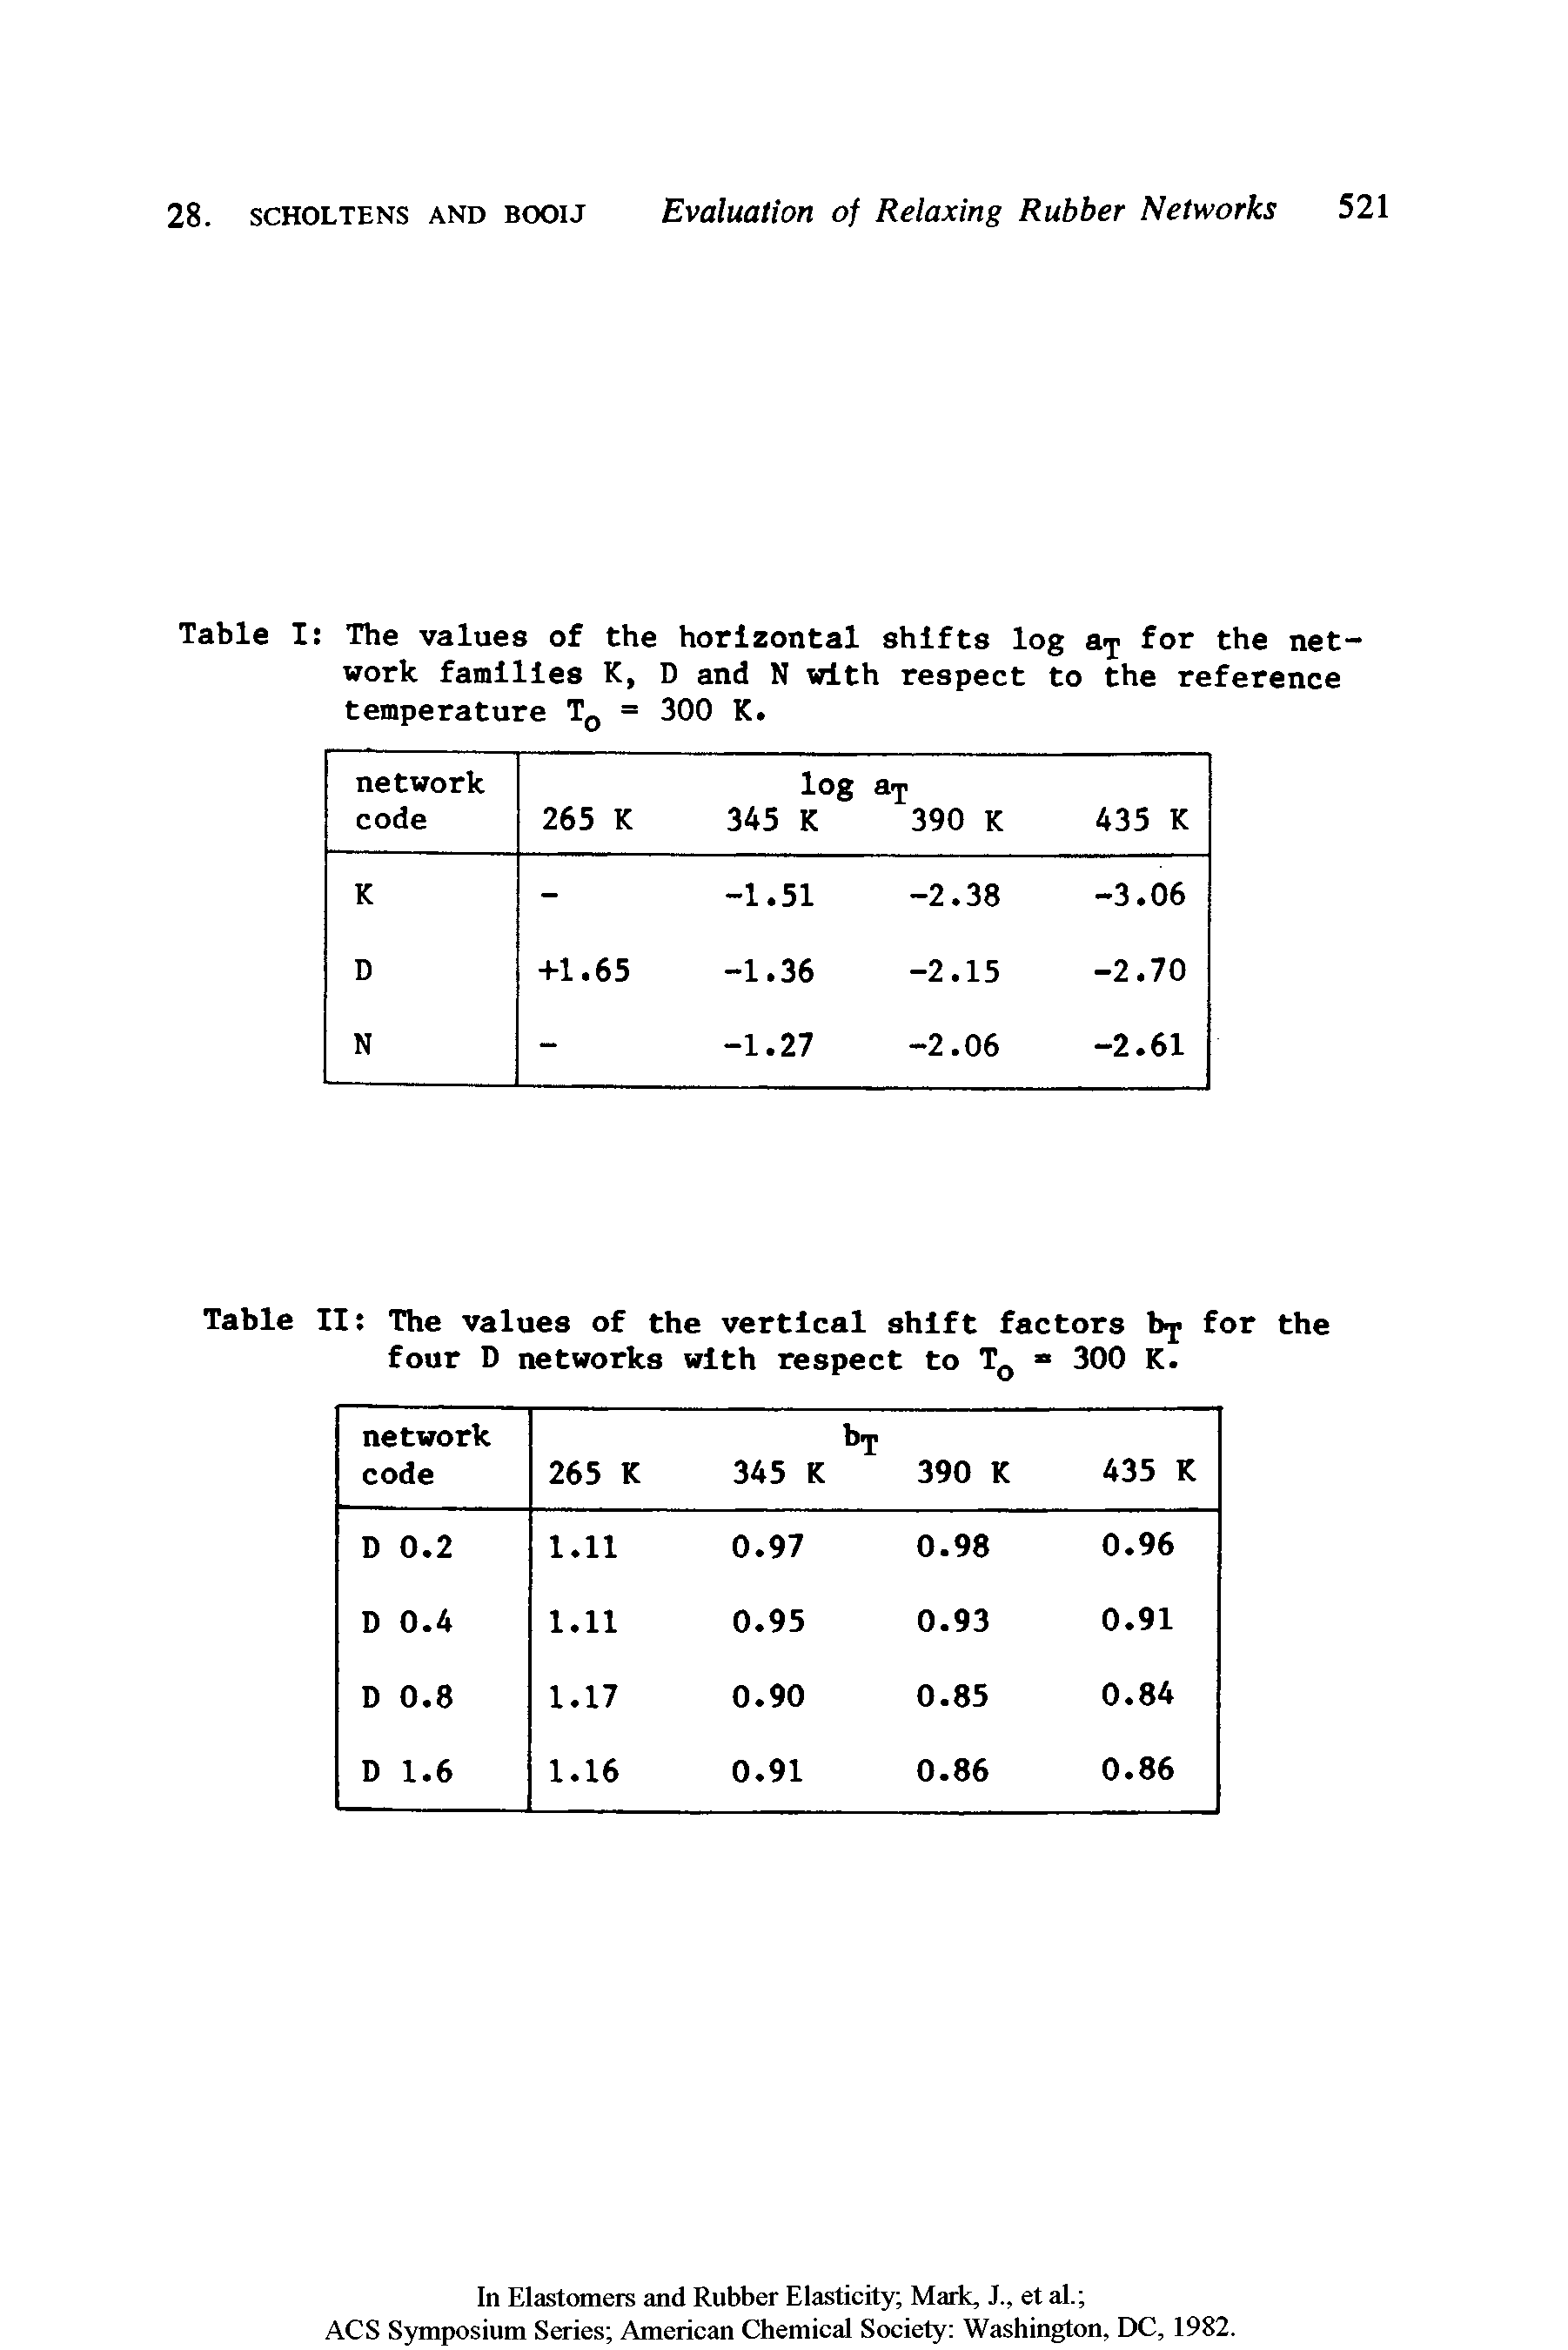 Table I The values of the horizontal shifts log aj for the network families K, D and N with respect to the reference temperature T0 = 300 K.